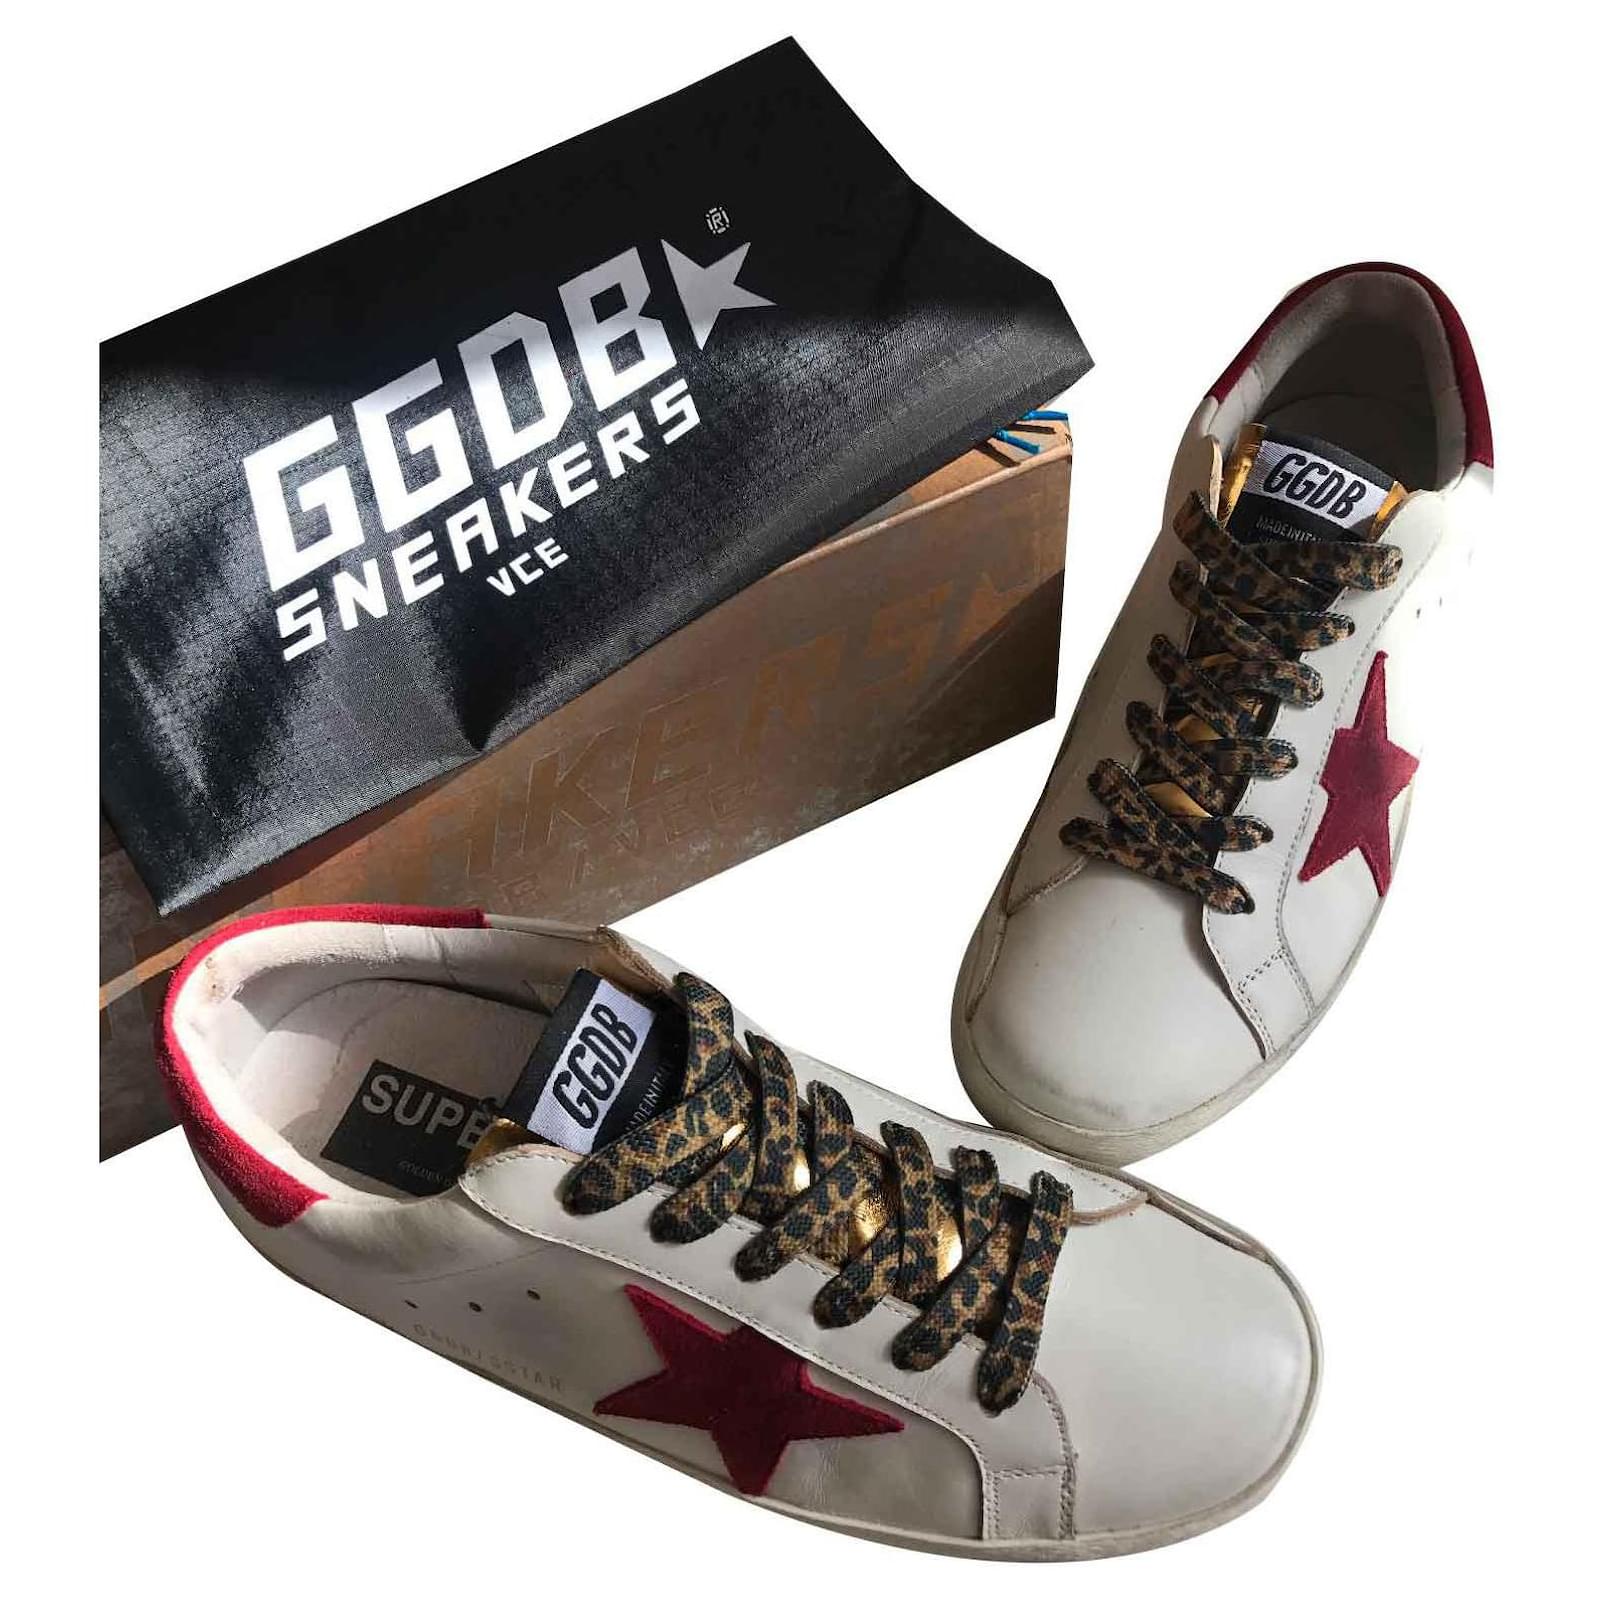 golden goose sneakers red laces